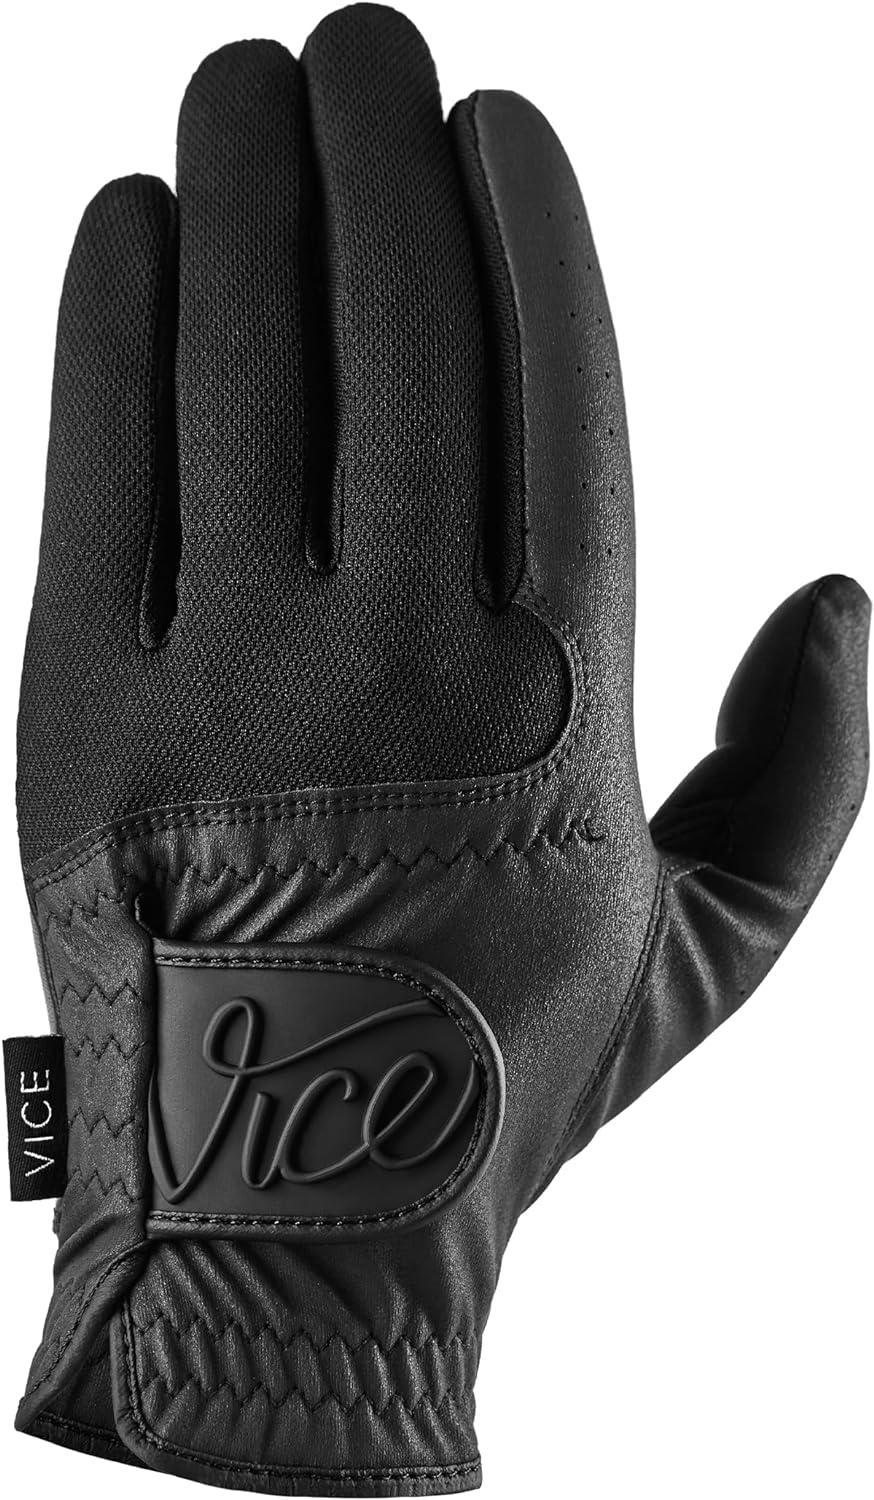 Vice Duro Golf Glove, Black (Prior Model) M/L ONLY! Right handed golfers (Glove goes on left hand) $4.99 @ Amazon